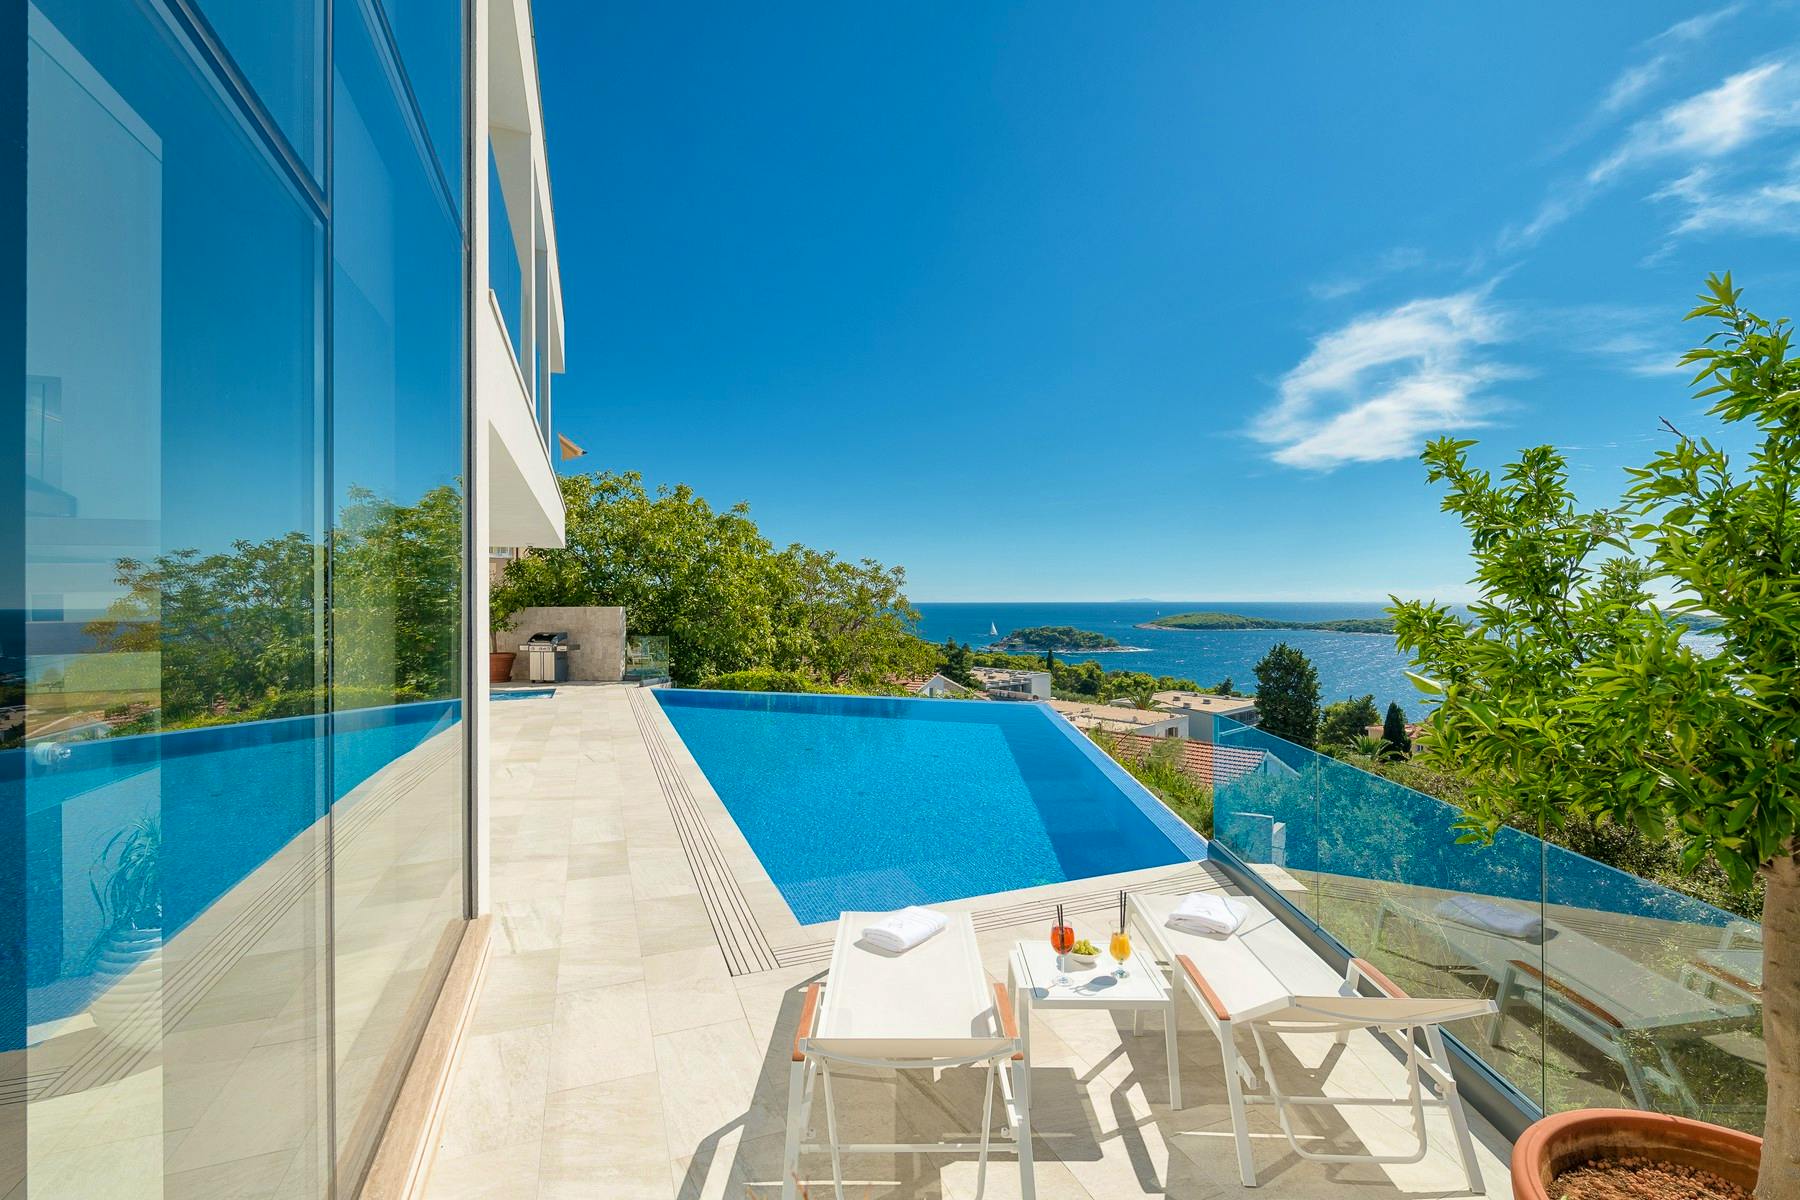 Spectacular sea view from the villa